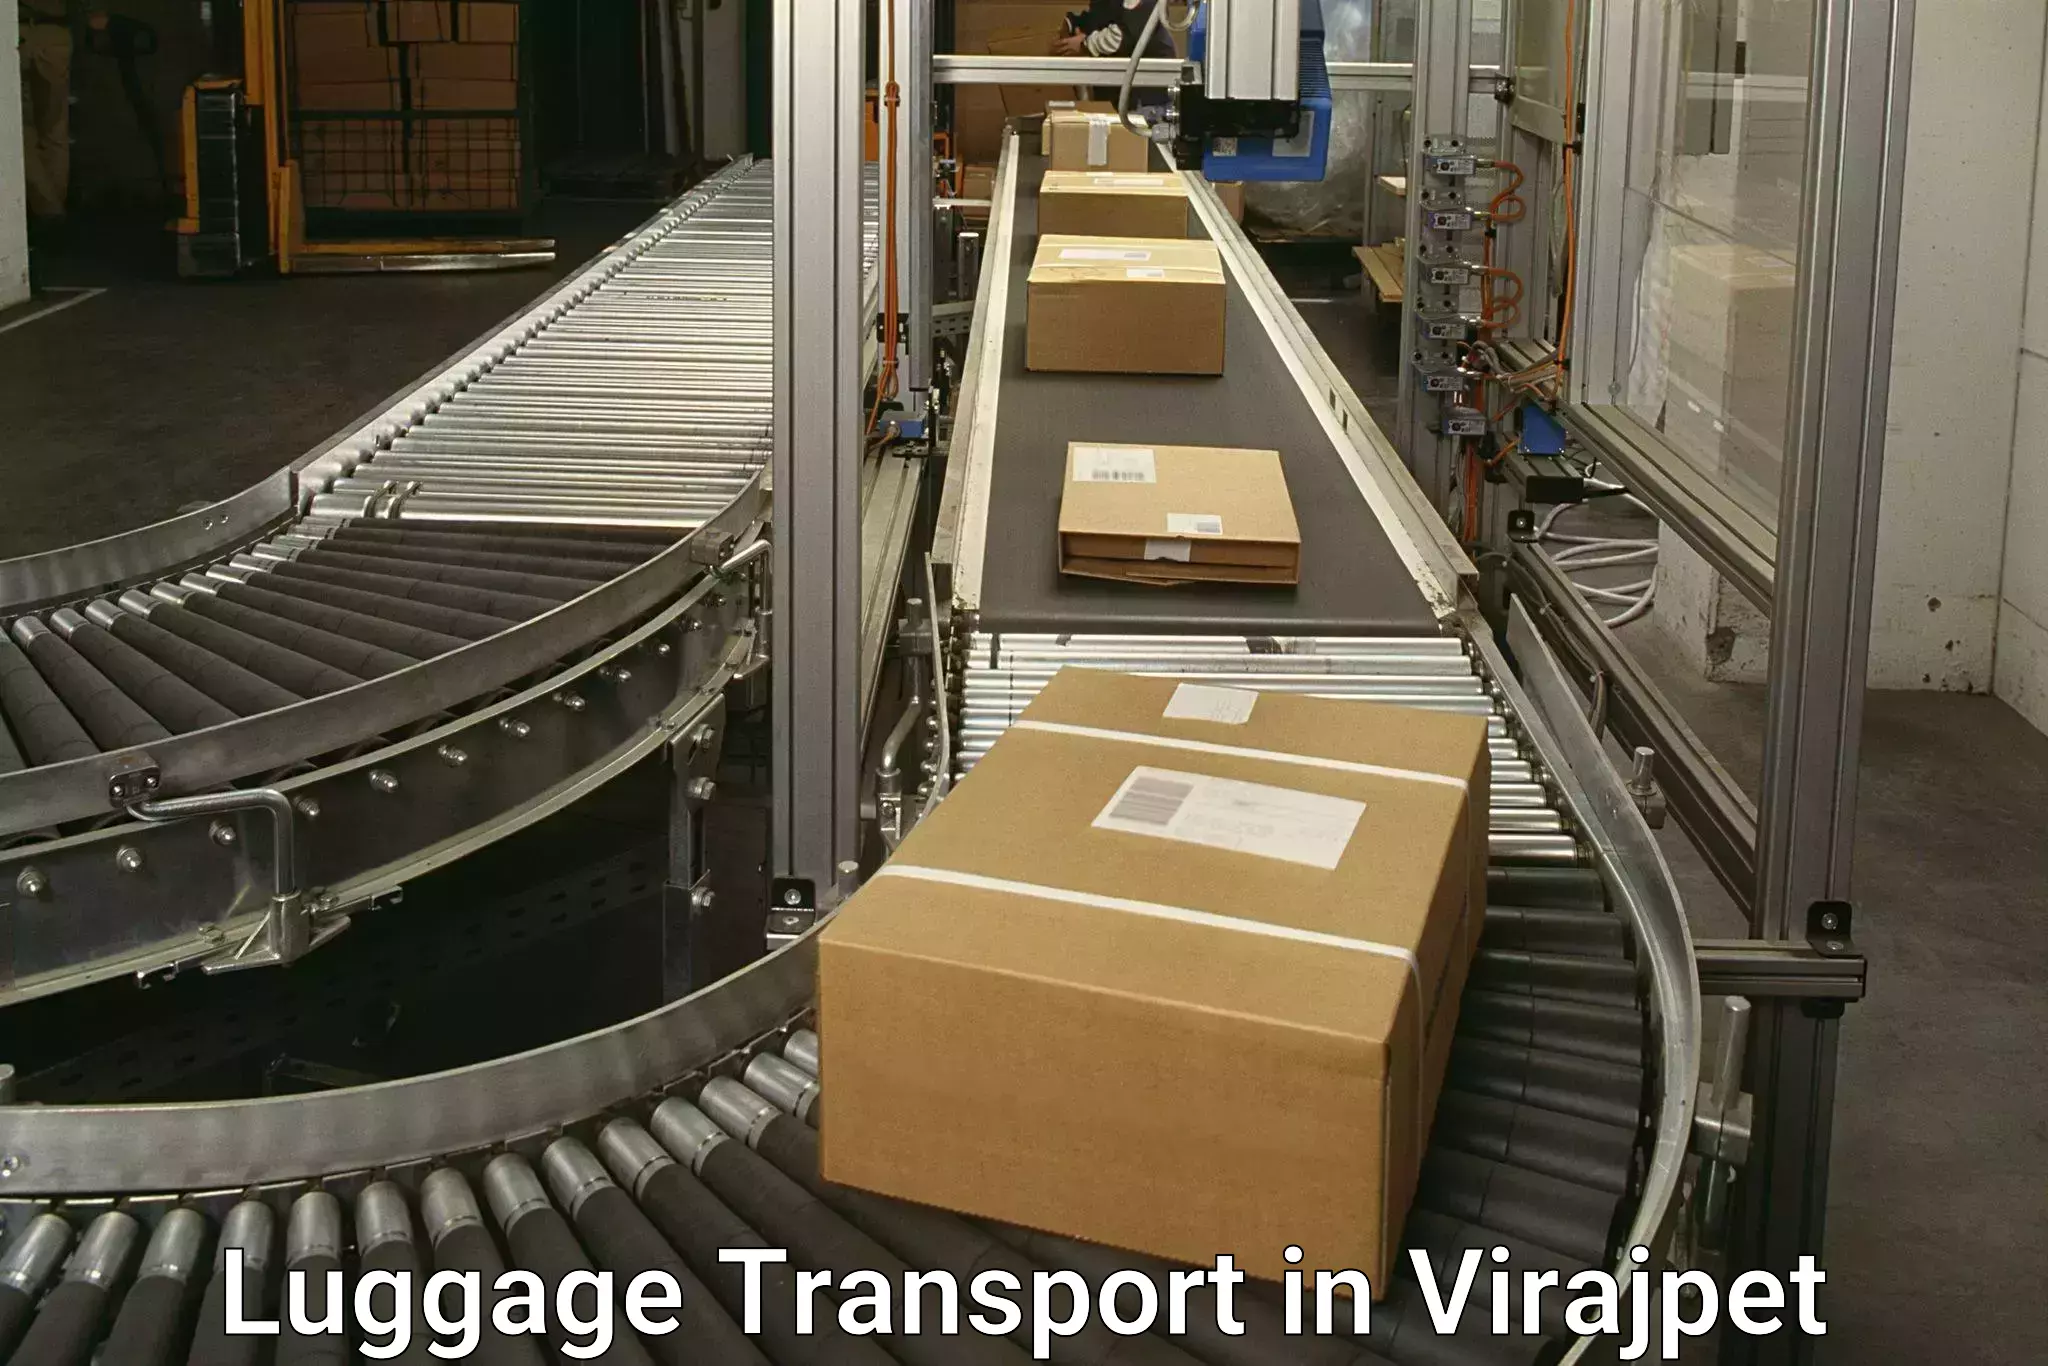 Domestic luggage transport in Virajpet